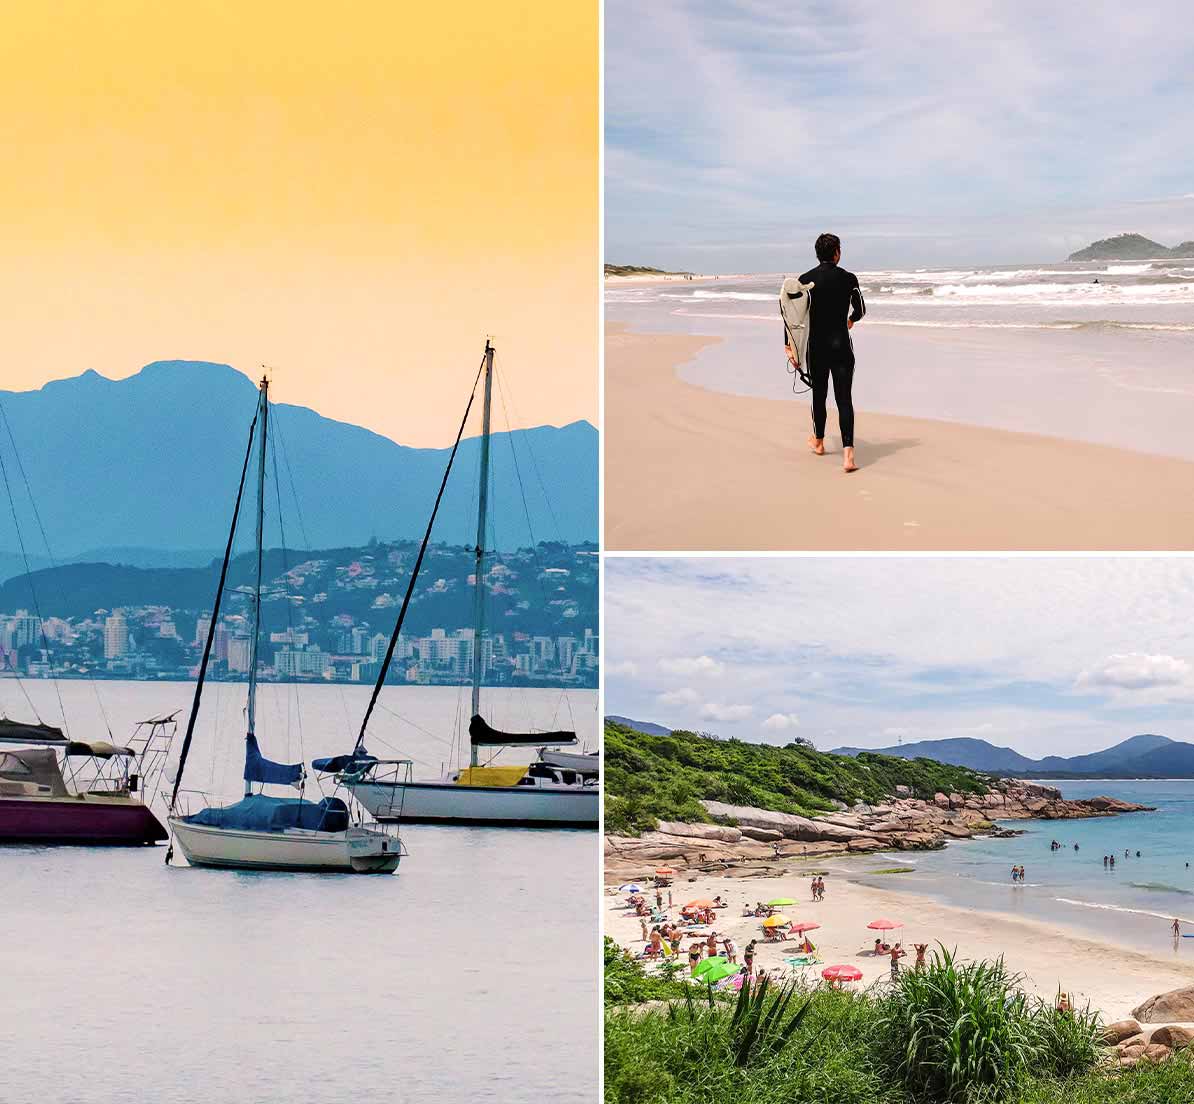 A collage showing sailboats in the water, a surfer, and people enjoying the beach in Florianopolis.